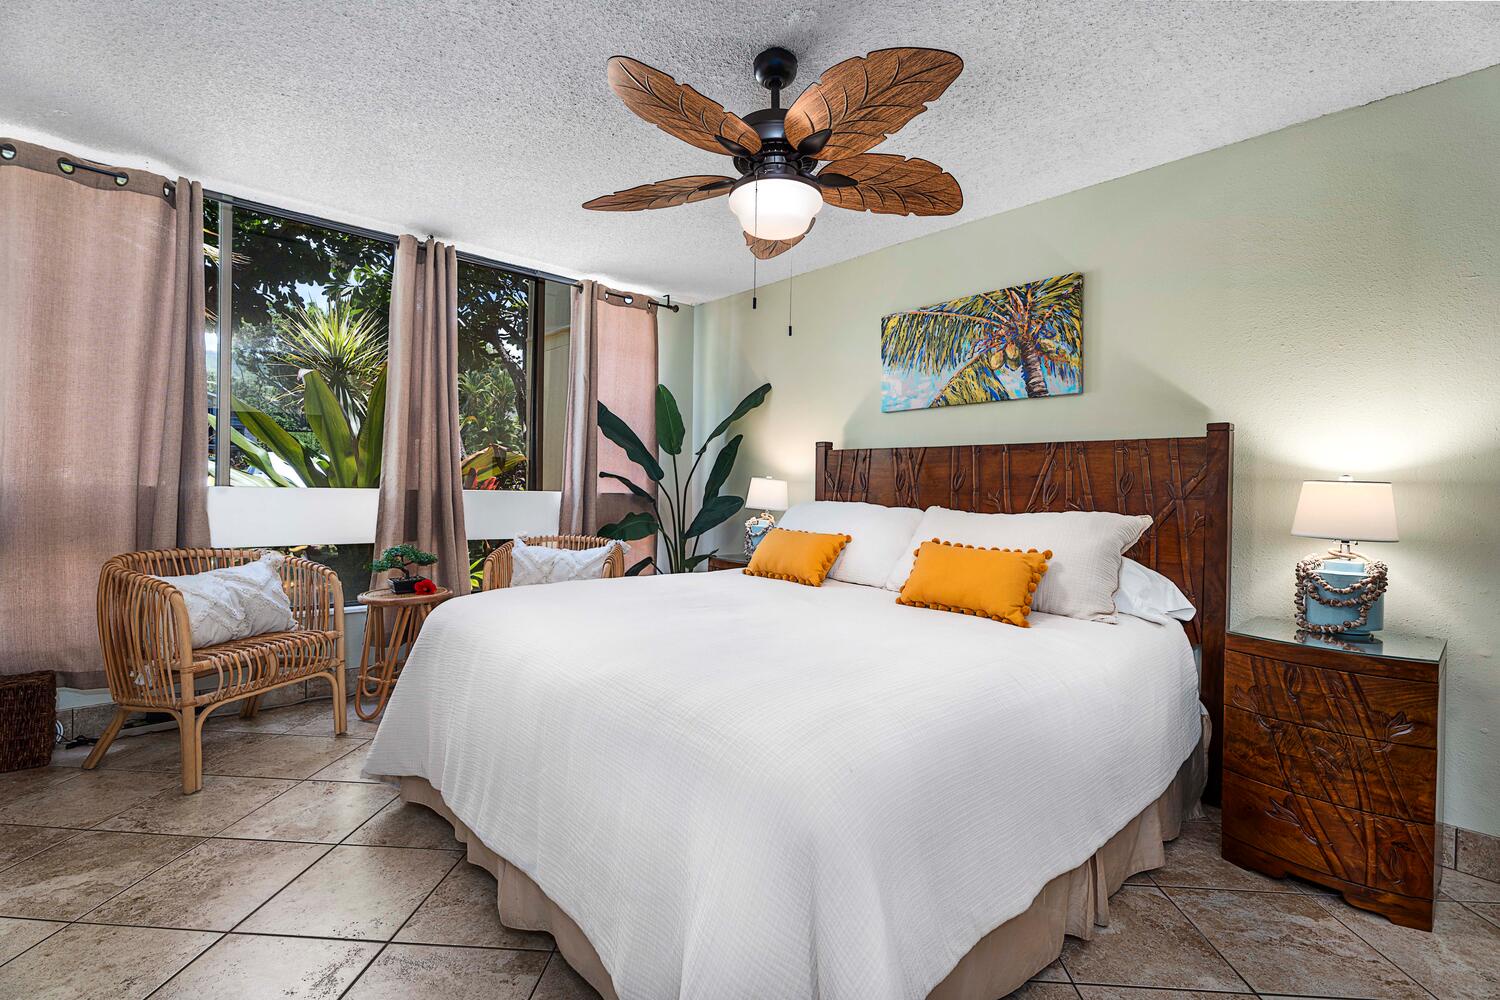 Kailua Kona Vacation Rentals, Keauhou Kona Surf & Racquet 1104 - Inviting guest suite with expansive glass walls, bringing stunning outdoor views right to your bedside.